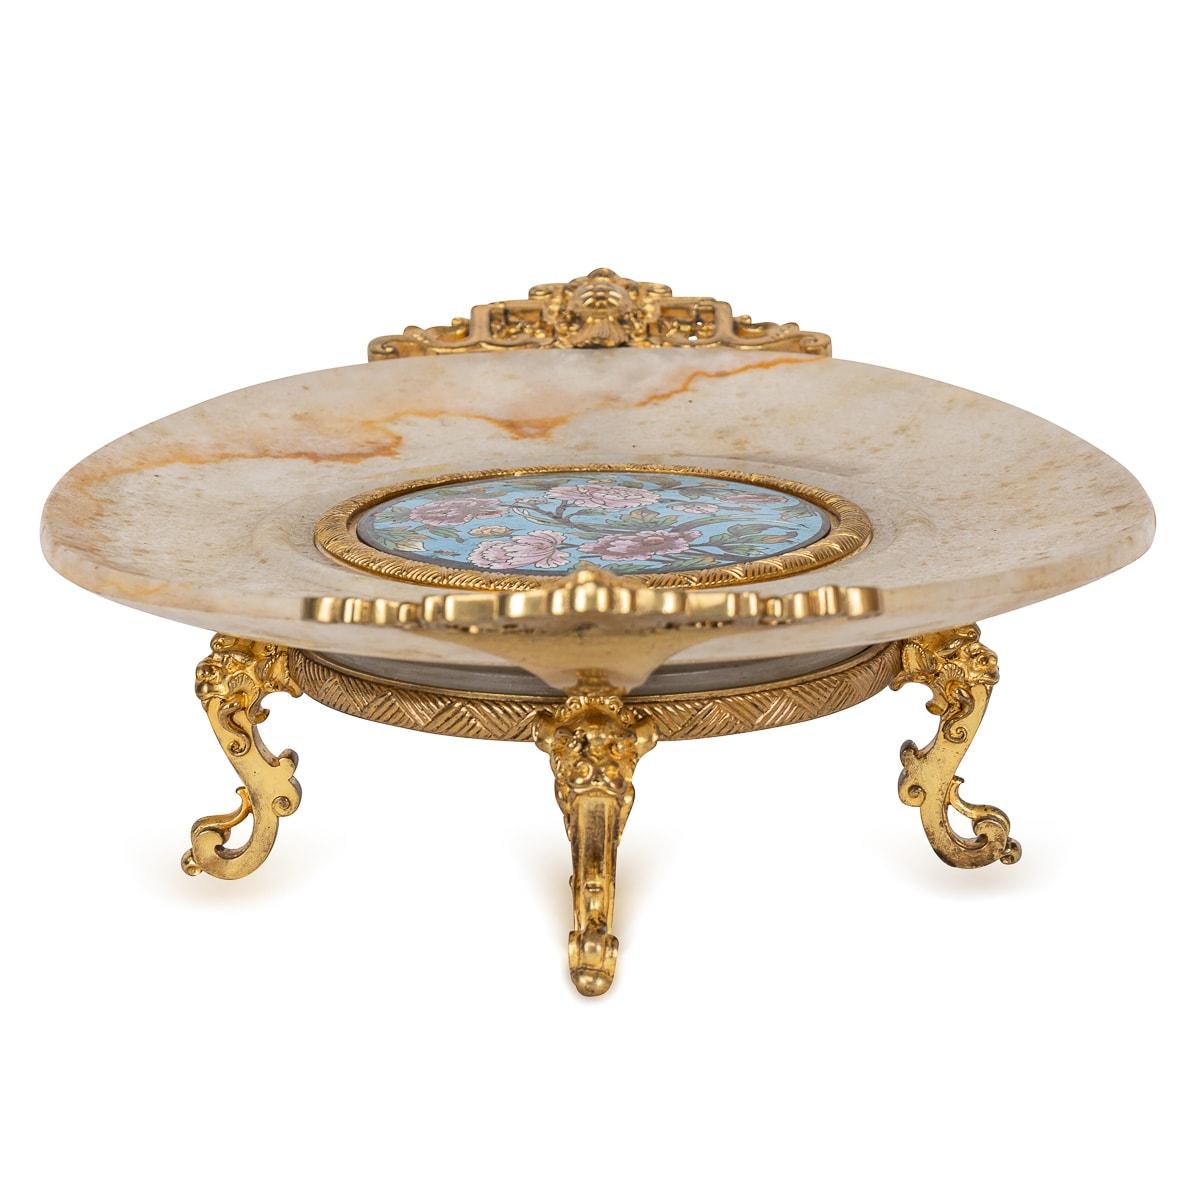 19th Century French Ormolu Mounted Onyx Marble & Enamel Centrepiece c.1880 In Good Condition For Sale In Royal Tunbridge Wells, Kent